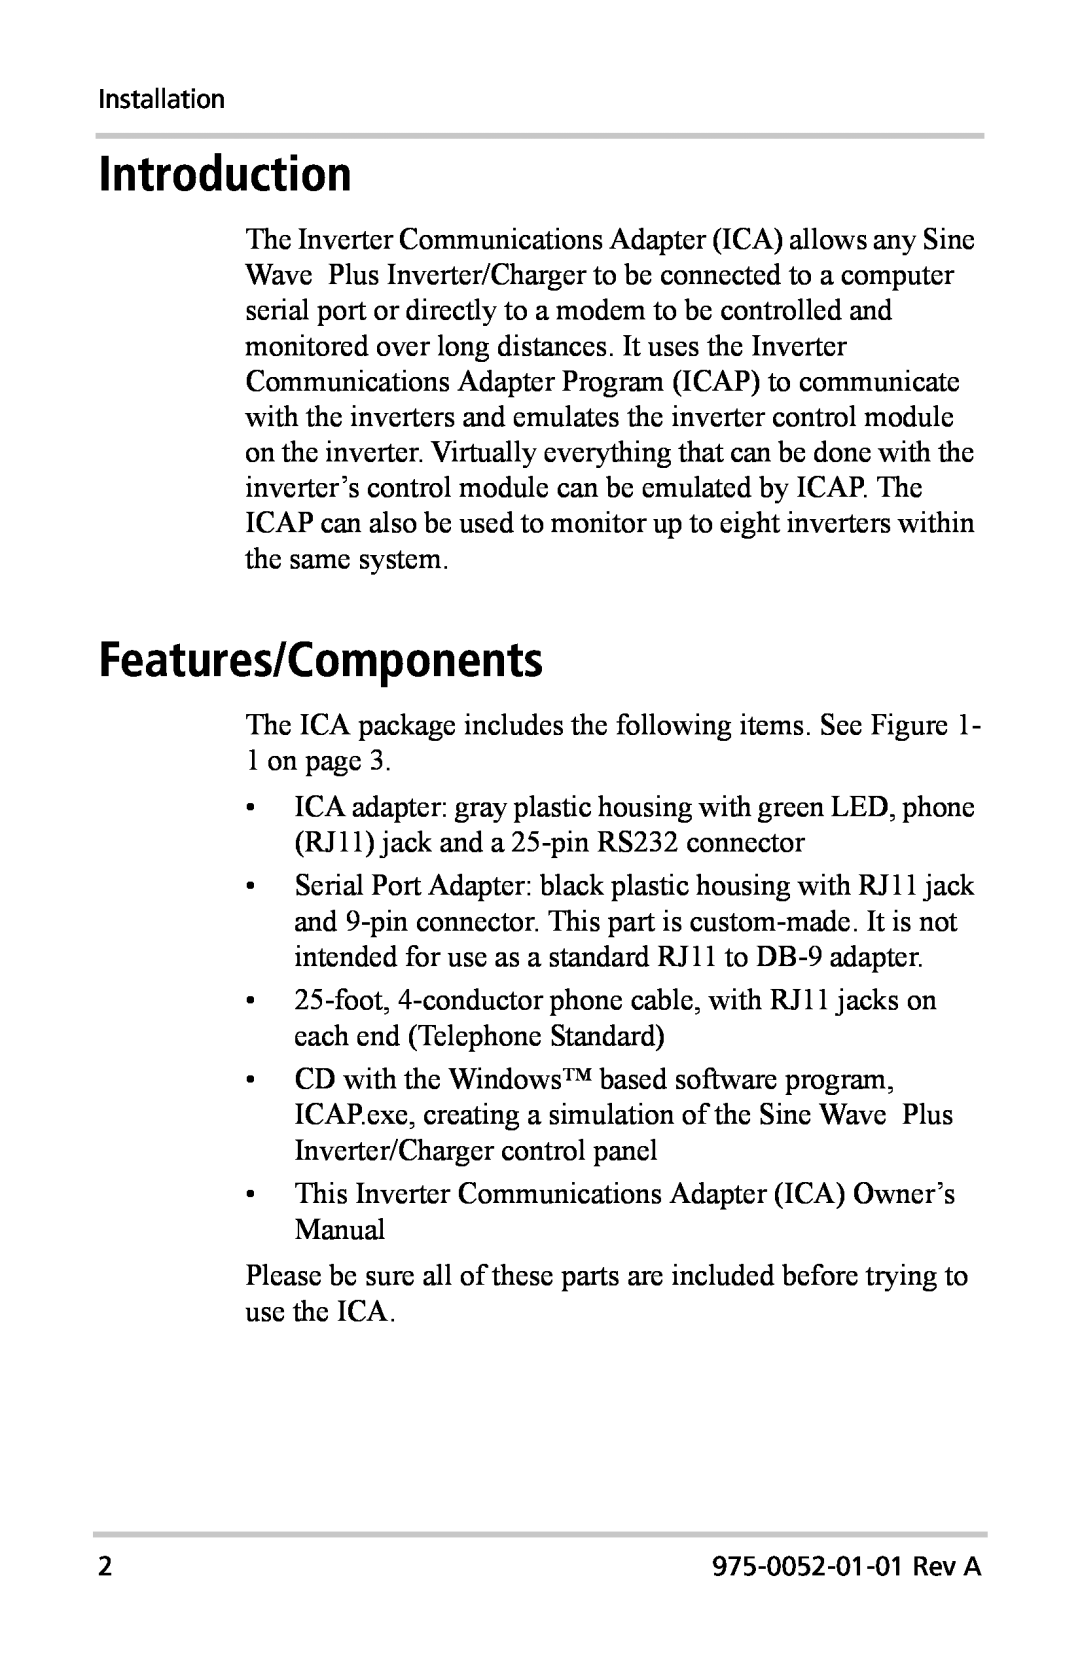 Xantrex Technology Inverter Communications Adapter manual Introduction, Features/Components 